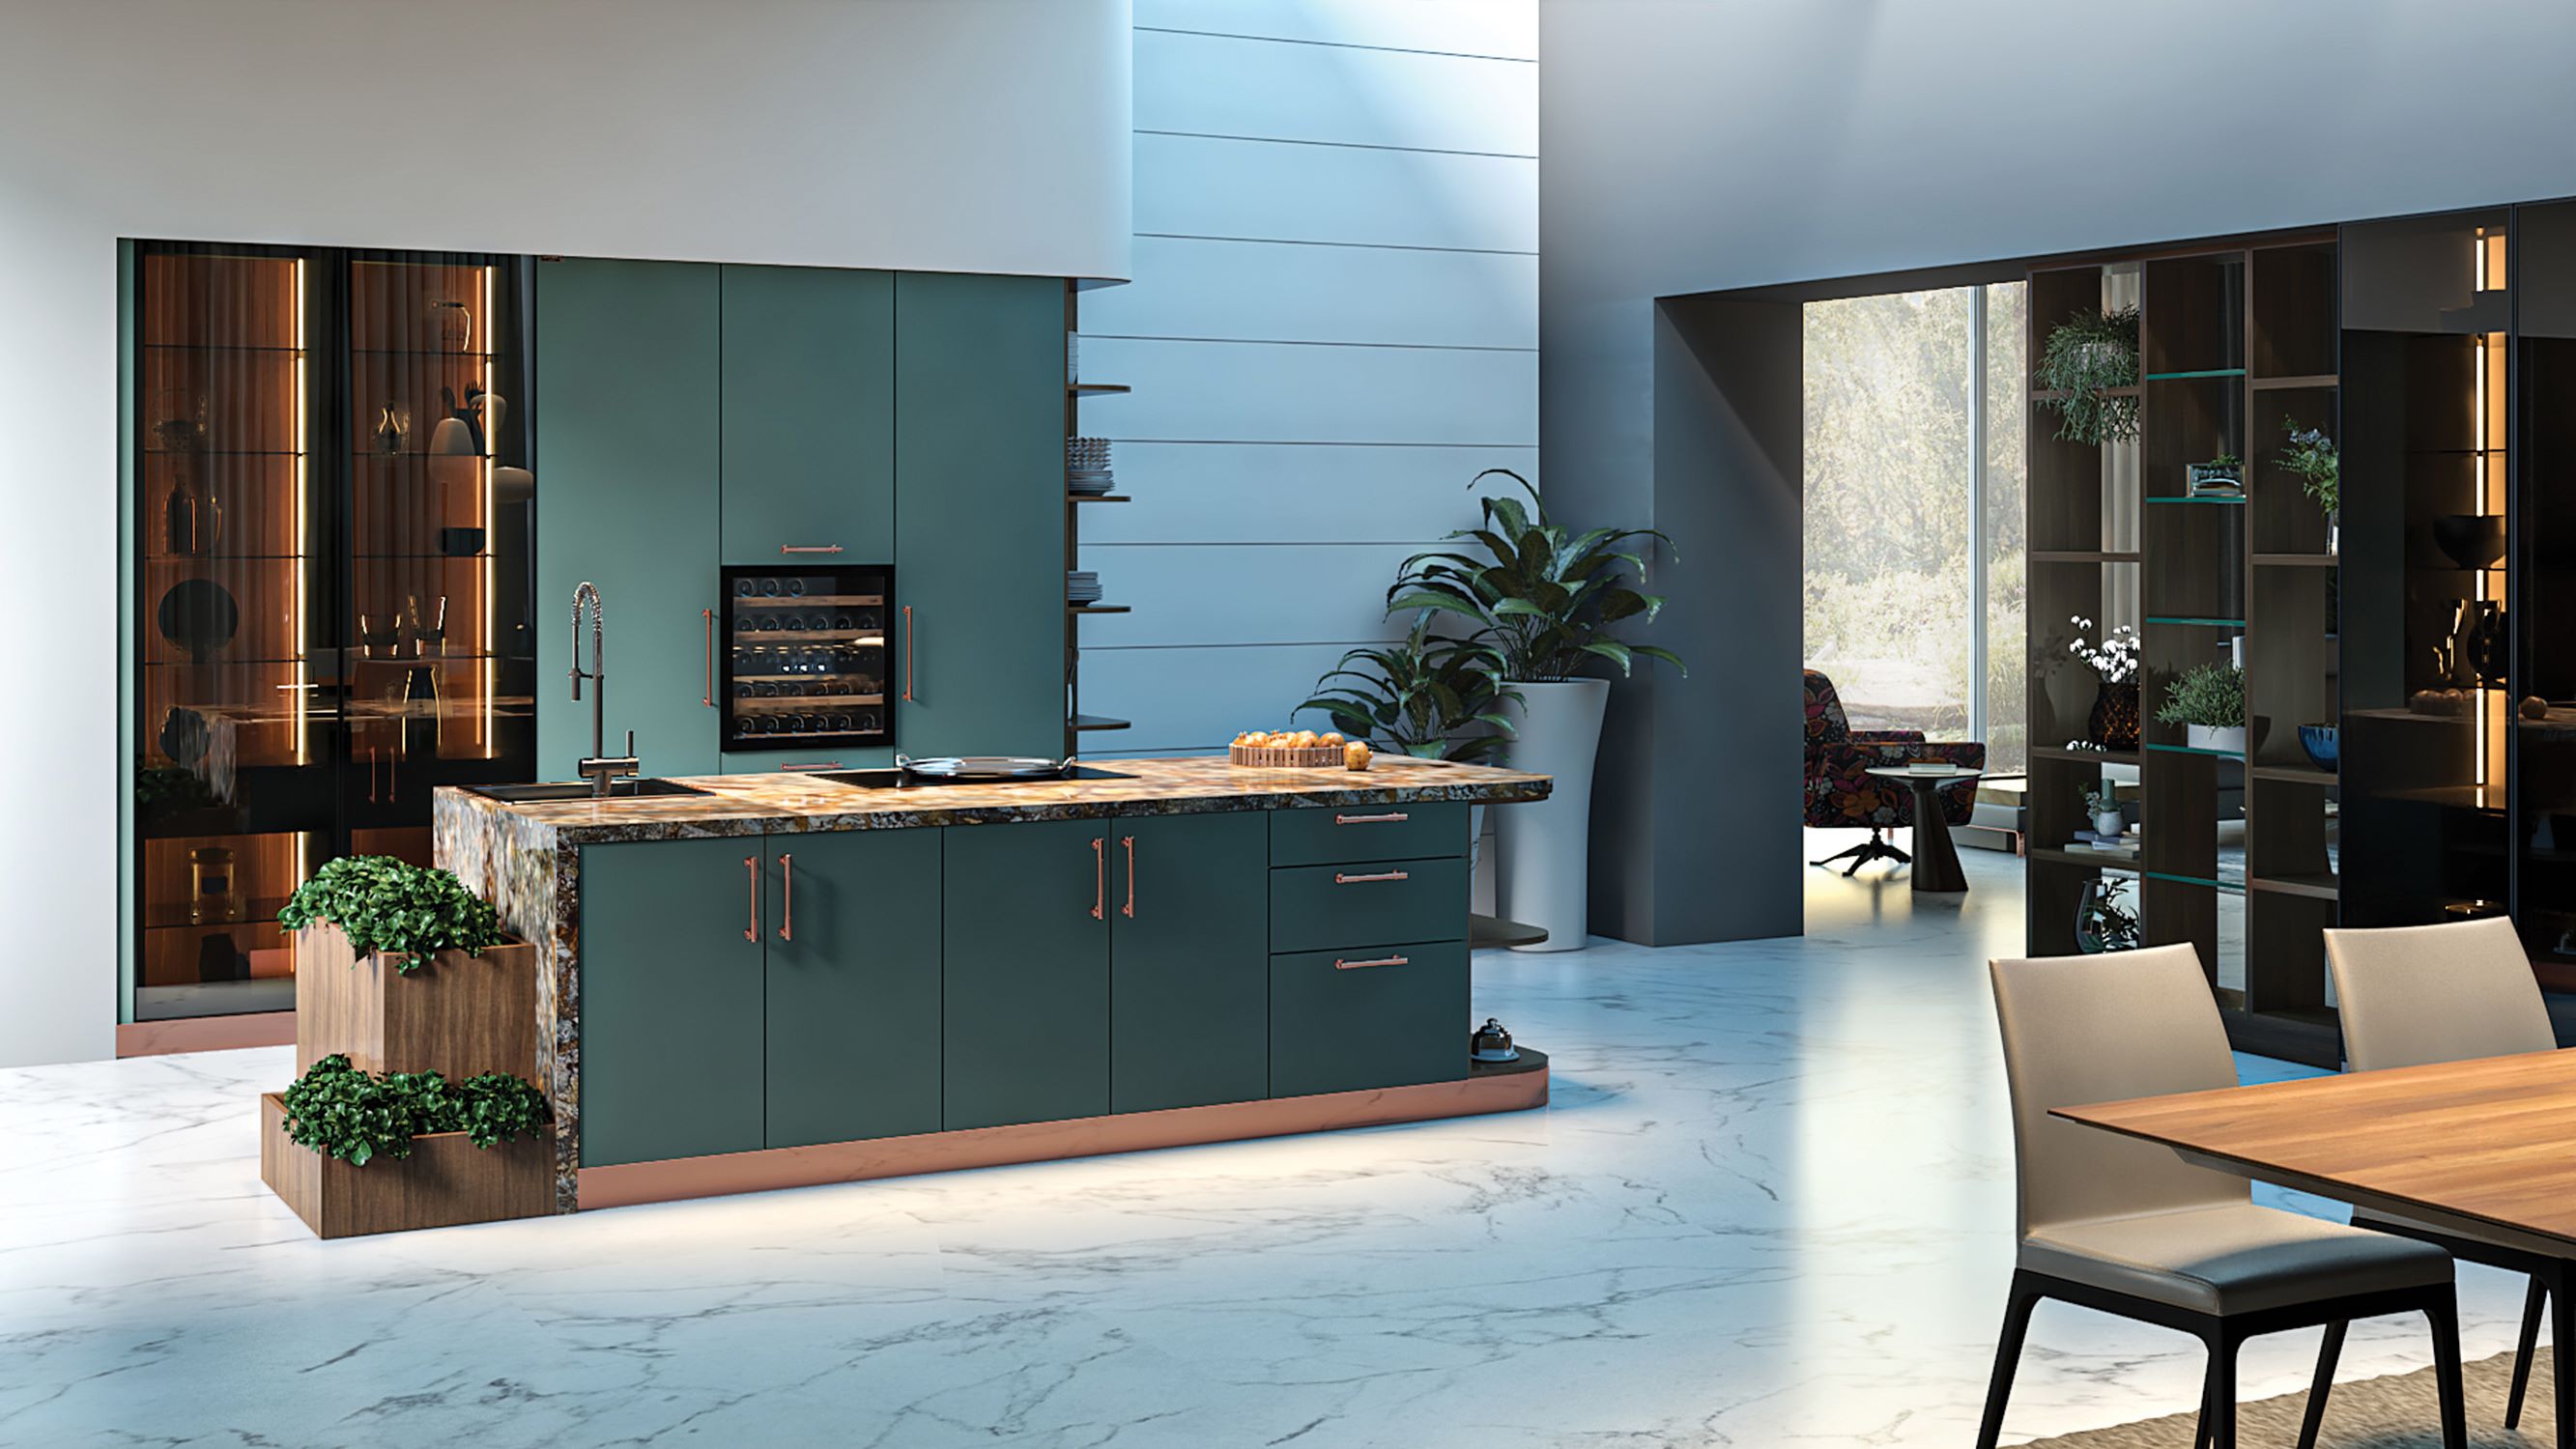 https://storage.googleapis.com/realtyplusmag-news-photo/news-photo/108804.Stanley-Group-Unveils-Kitchen-and-Cabinetry-Solutions-(2).jpg